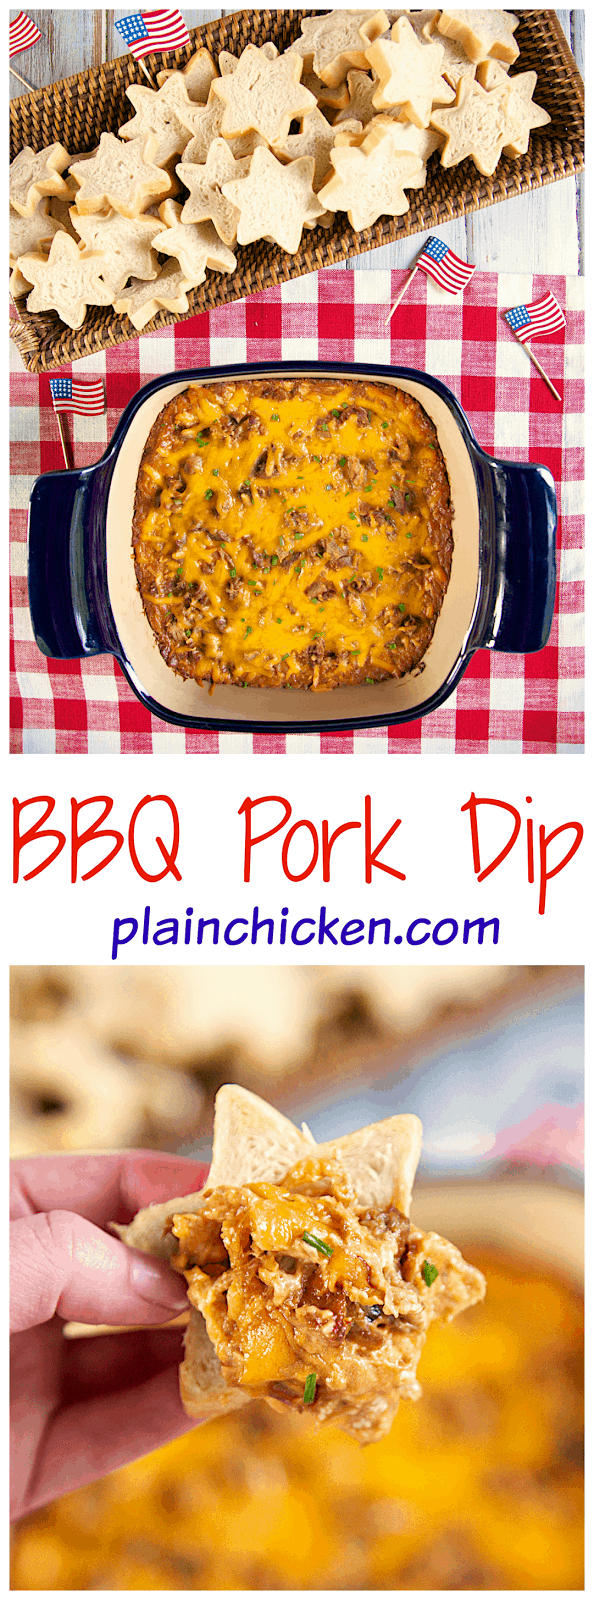 BBQ Pork Dip - THE BEST! I could make a meal out of this dip! Pork, cream cheese, Ranch, BBQ sauce, cheddar cheese and green onions. YUM! You can make this dip ahead of time and refrigerate until you are ready to bake. Perfect for bringing to a party!